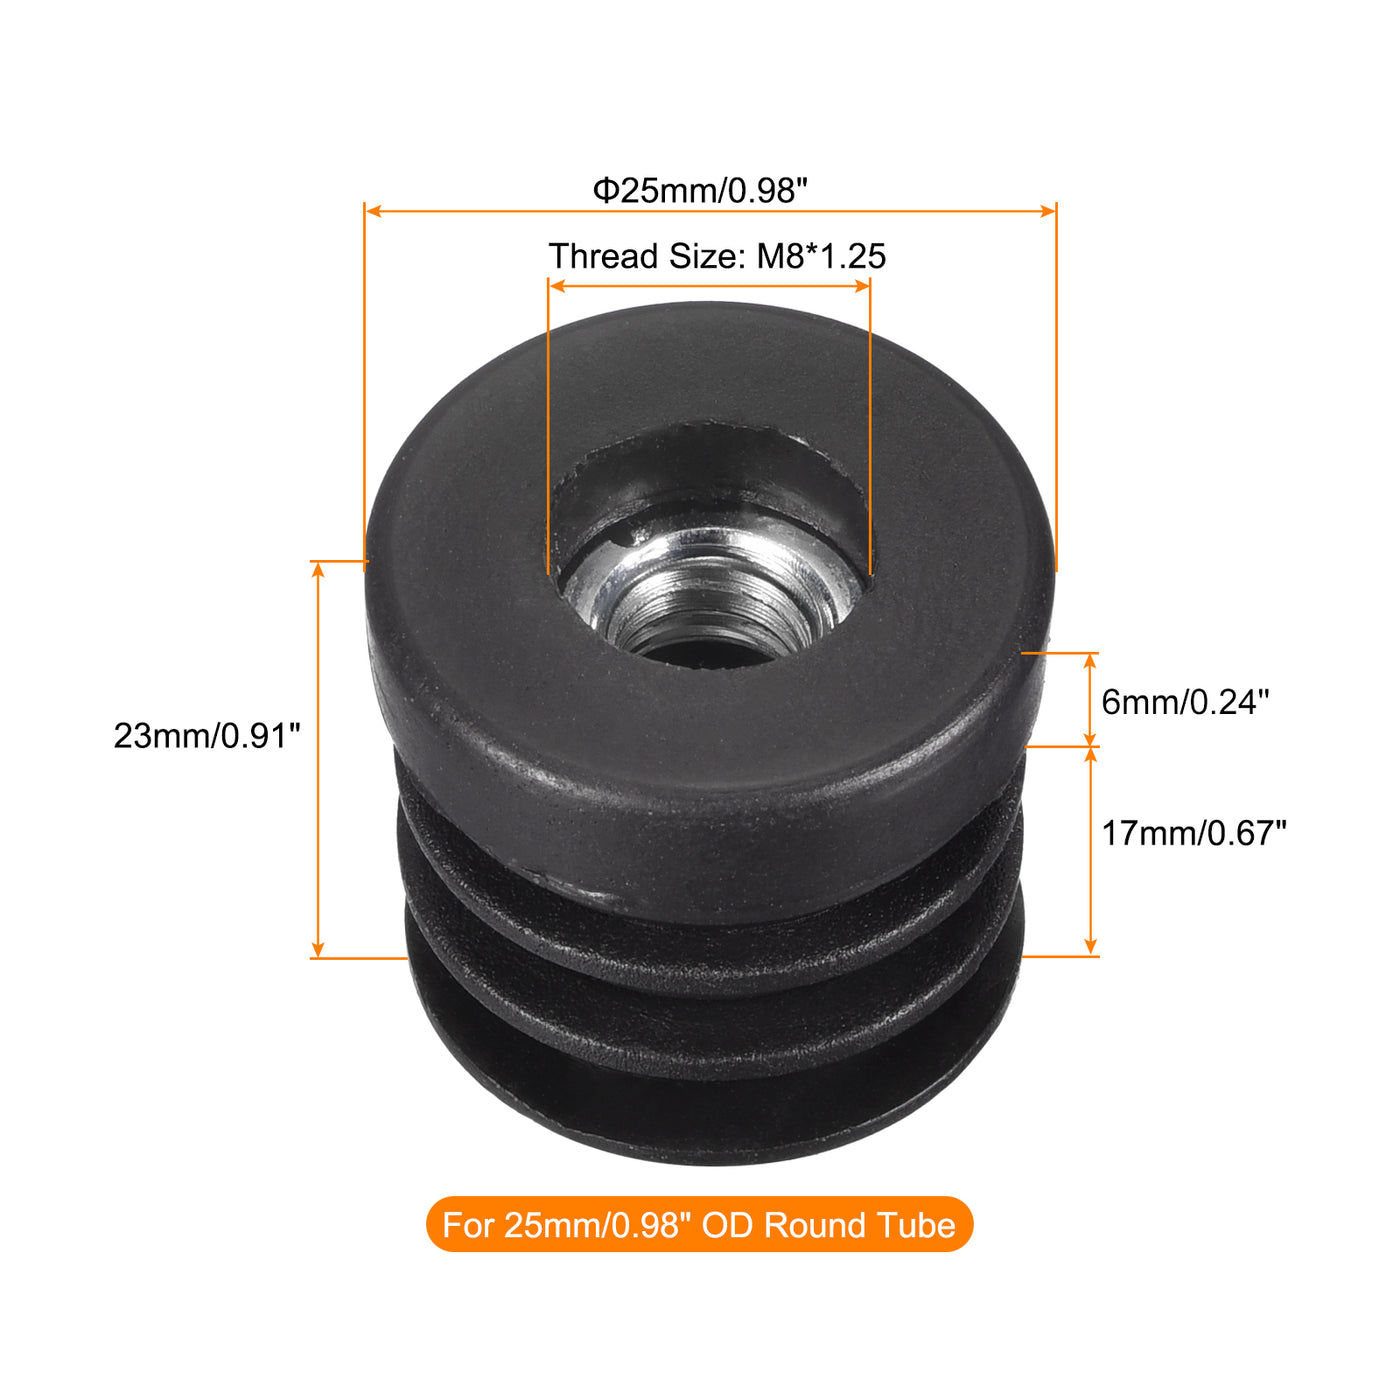 uxcell Uxcell 24Pcs 25mm/0.98" Caster Insert with Thread, Round M8 Thread for Furniture